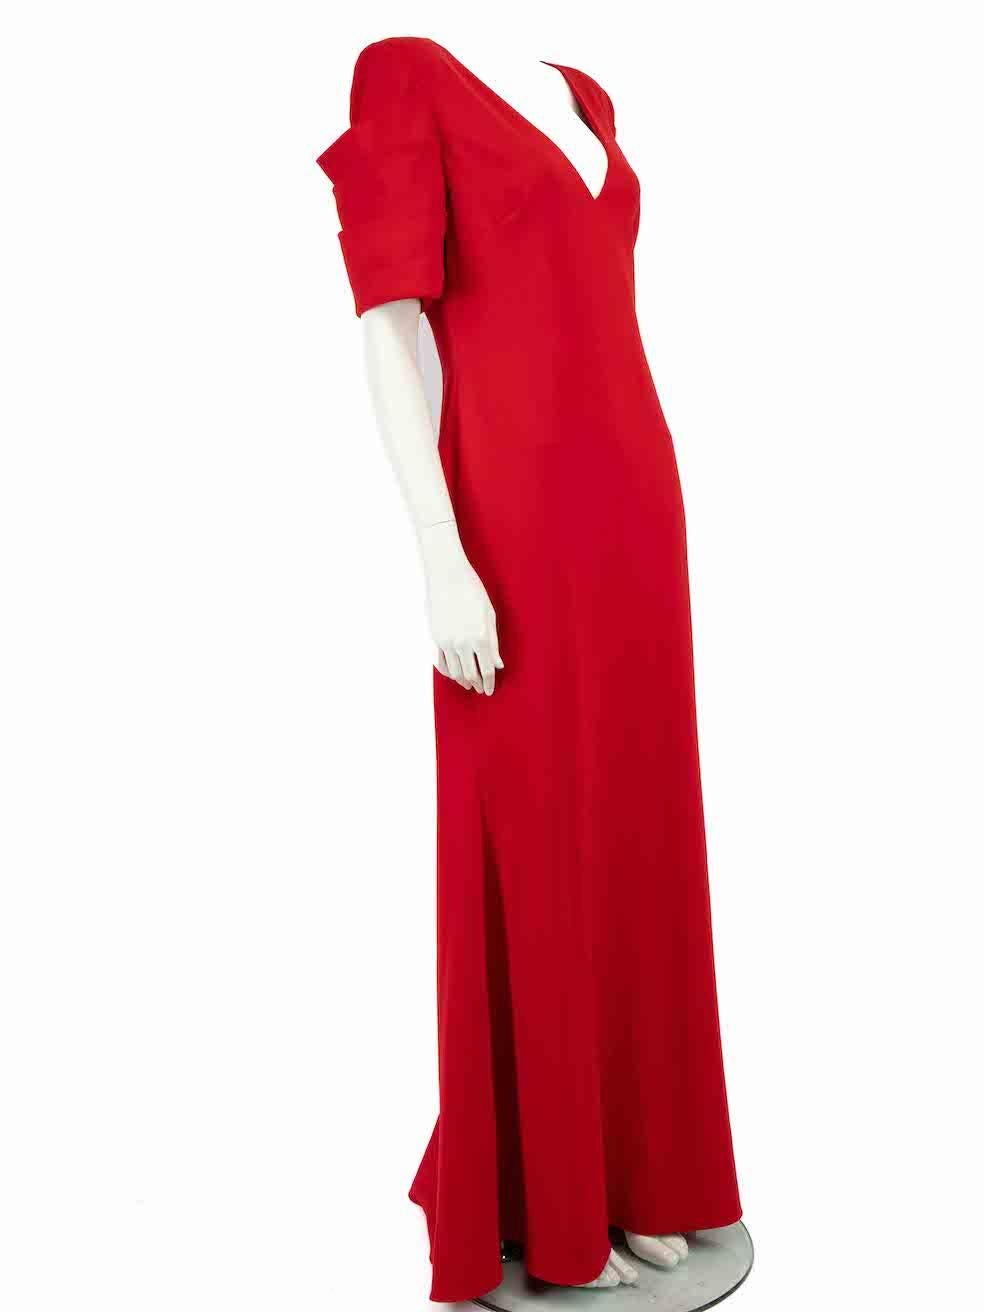 CONDITION is Very good. Minimal wear to dress is evident. Minimal wear to the front and hem with discoloured marks to the front and back on this used Badgley Mischka designer resale item.
 
 
 
 Details
 
 
 Red
 
 Polyester
 
 Gown
 
 V-neck
 
